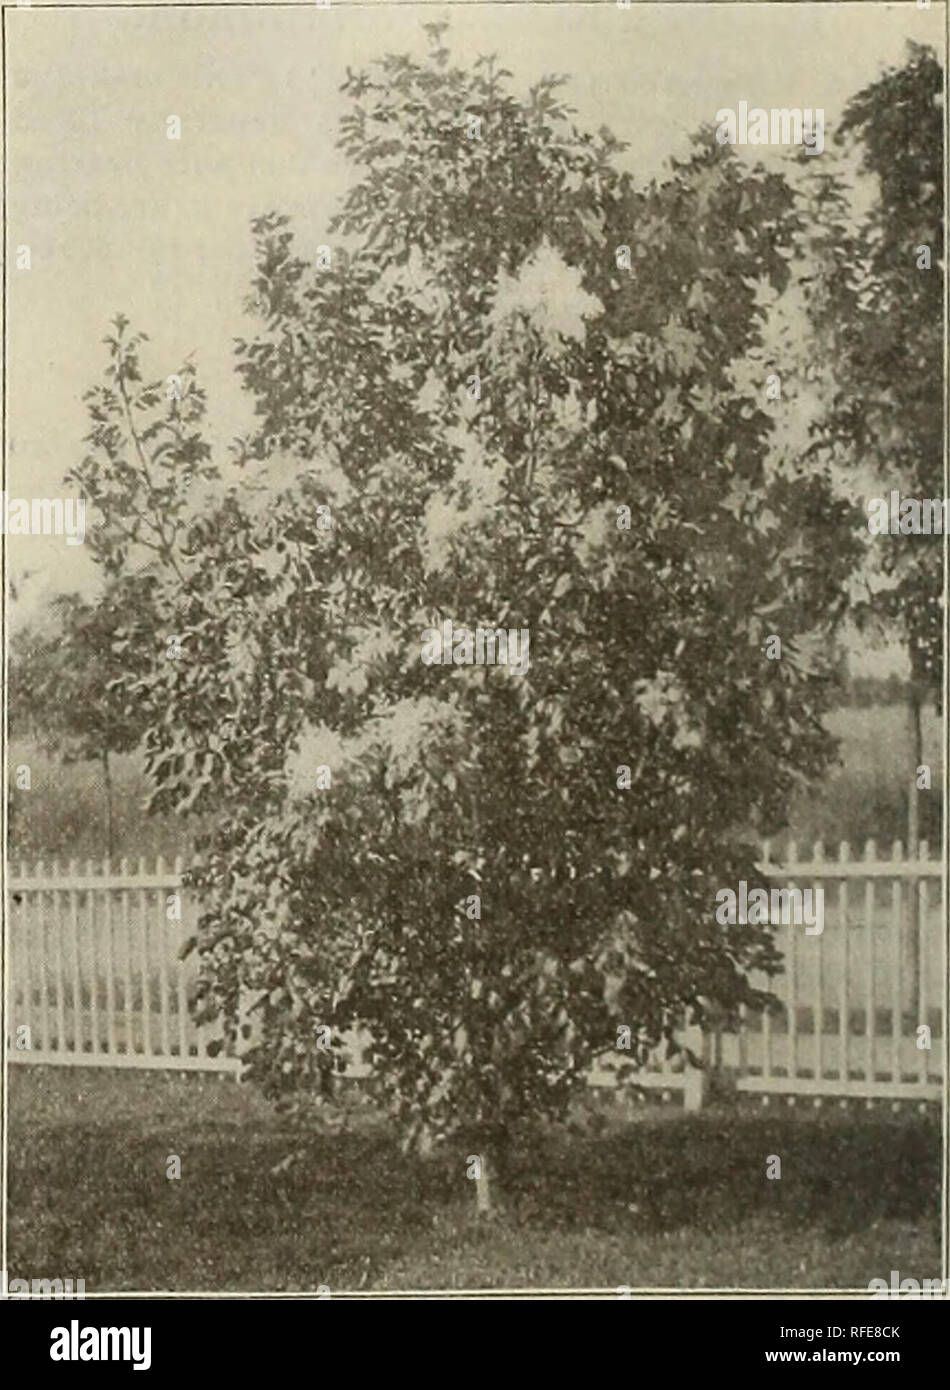 . Descriptive catalogue : ornamental trees, shrubs, vines, evergreens, hardy perennials and fruits. Nursery stock Pennsylvania Catalogs; Nurseries (Horticulture) Pennsylvania Catalogs; Trees Seedlings Catalogs; Ornamental shrubs Catalogs; Flowers Catalogs; Plants, Ornamental Catalogs; Fruit Catalogs. FRAXINUS AMERICANA. (American White Ash.) This is one of the best of Ashes, being valuable for ornamental lawn planting, or for the city street or avenue. The large leaves are a dark green on the upper surface, and lighter beneath. It is very satisfactory for all purposes. raxinus Americana. Ameri Stock Photo